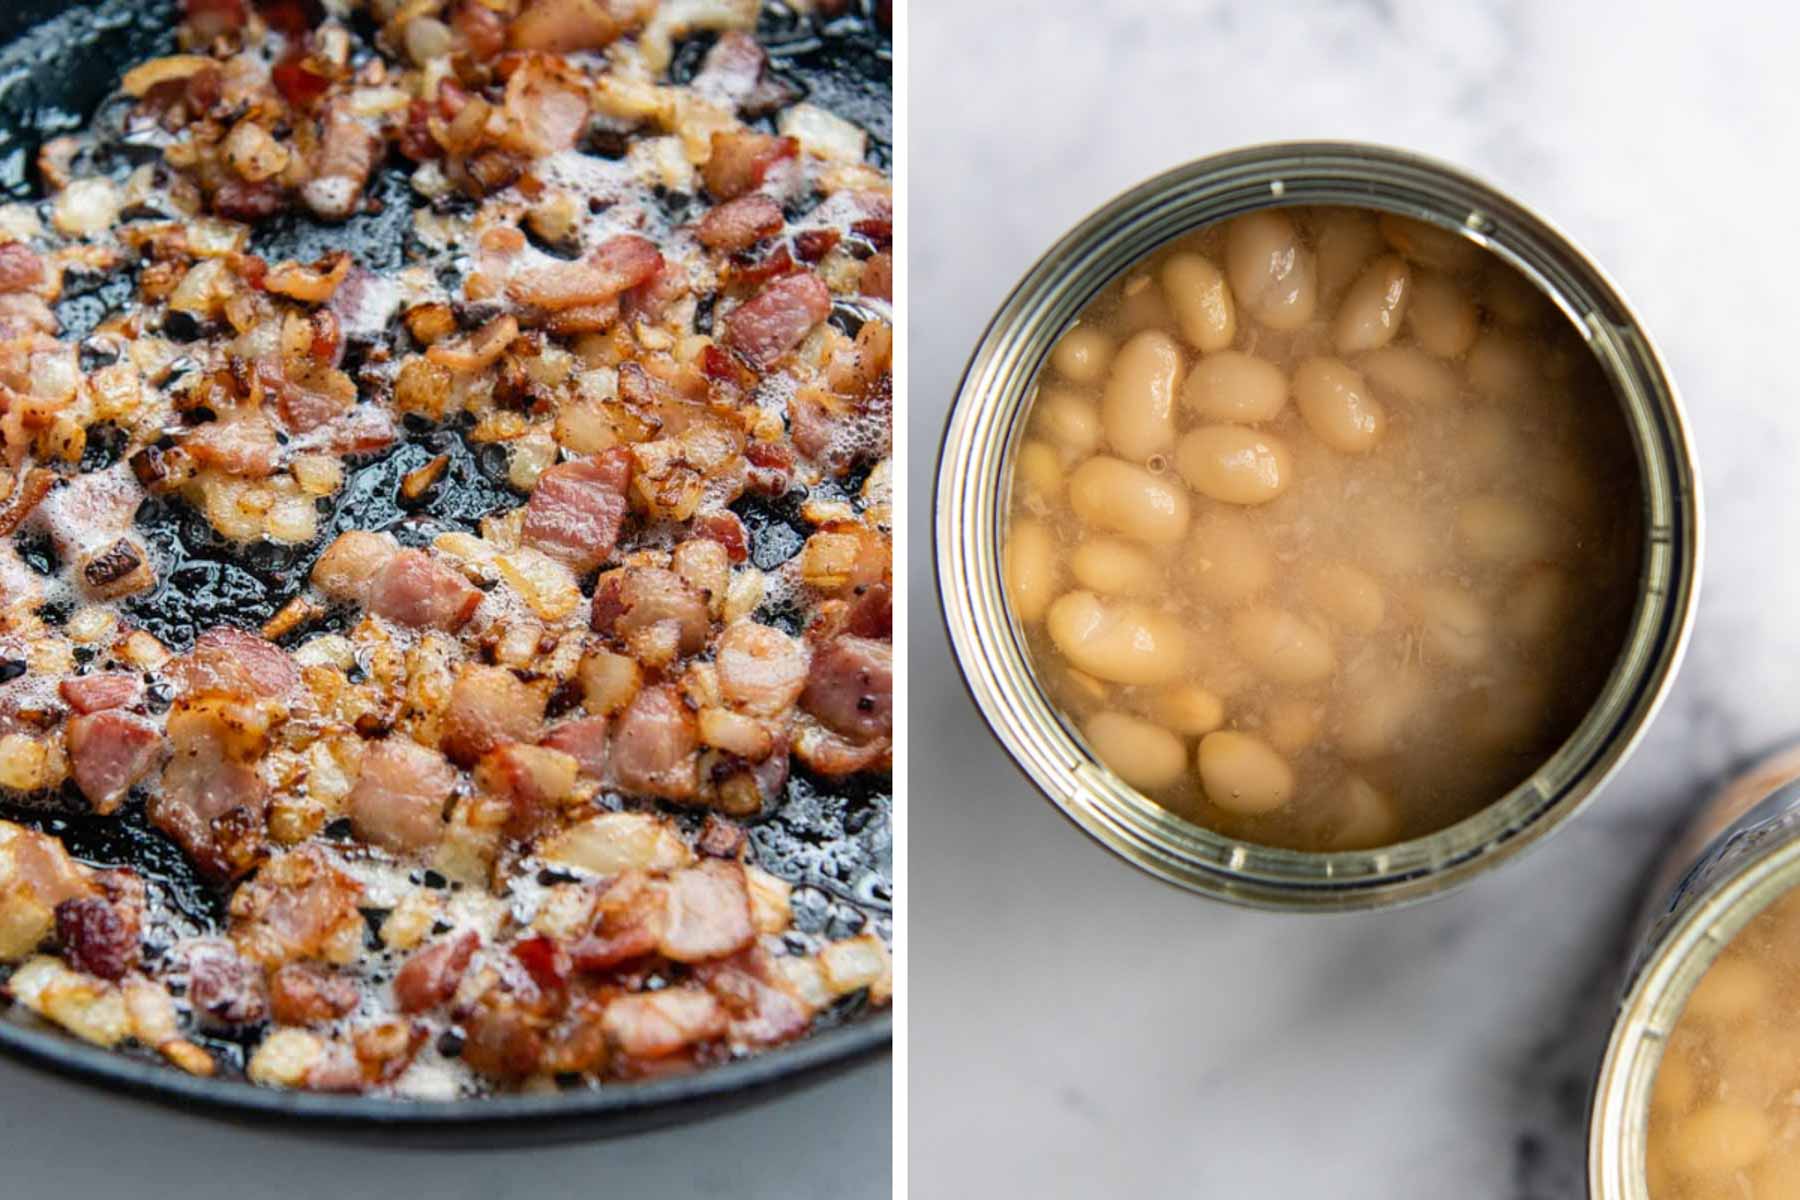 images showing the cooked bacon and onions with slightly drained beans.